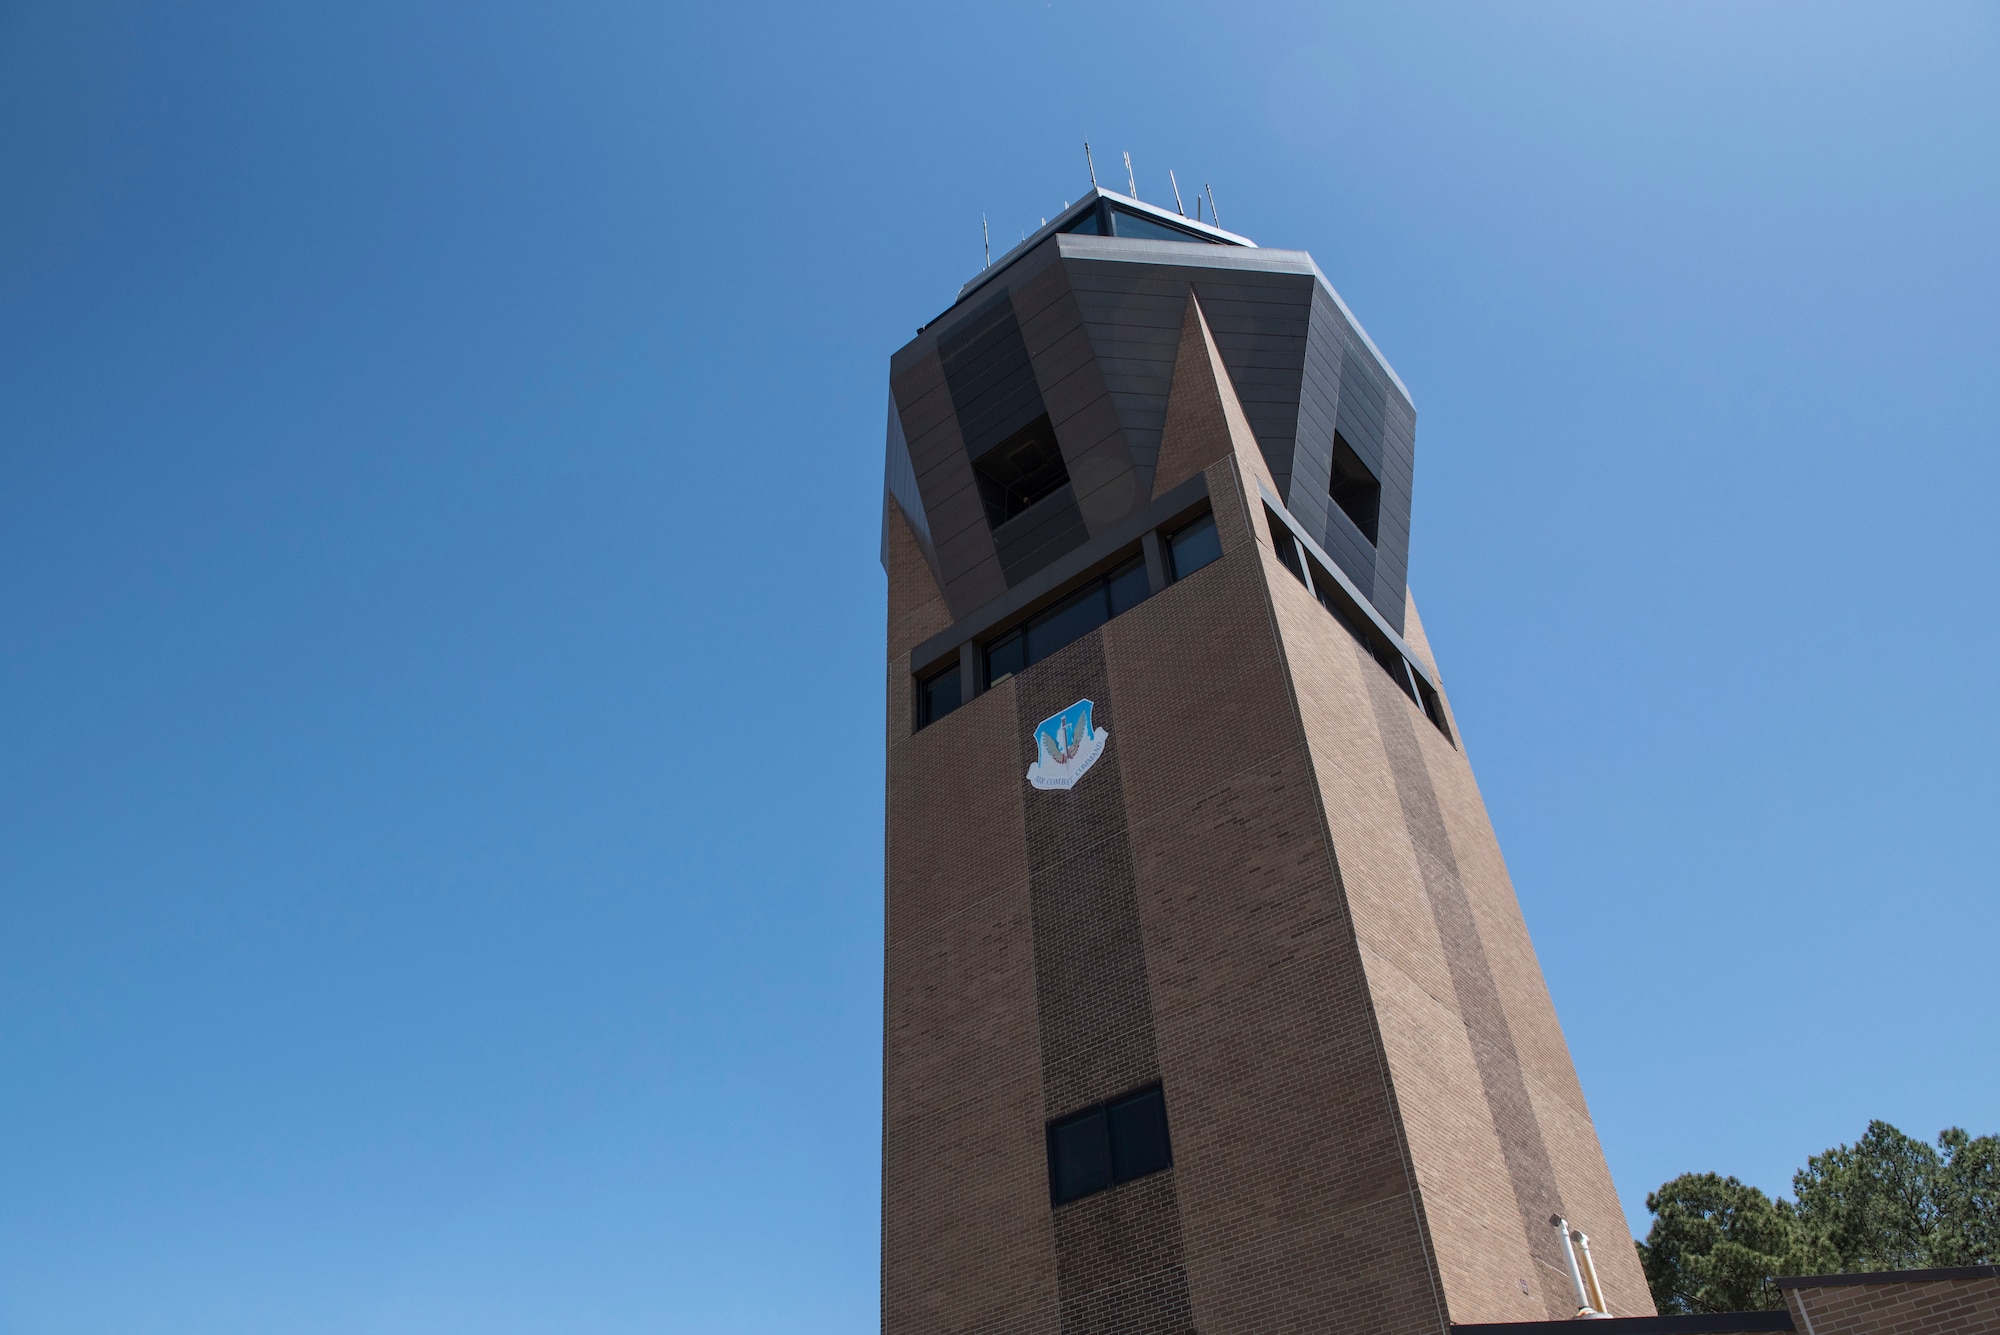 Airmen assigned to the 20th Operations Support Squadron air traffic control tower direct aircraft within their designated airspace to ensure smooth operations and safety.